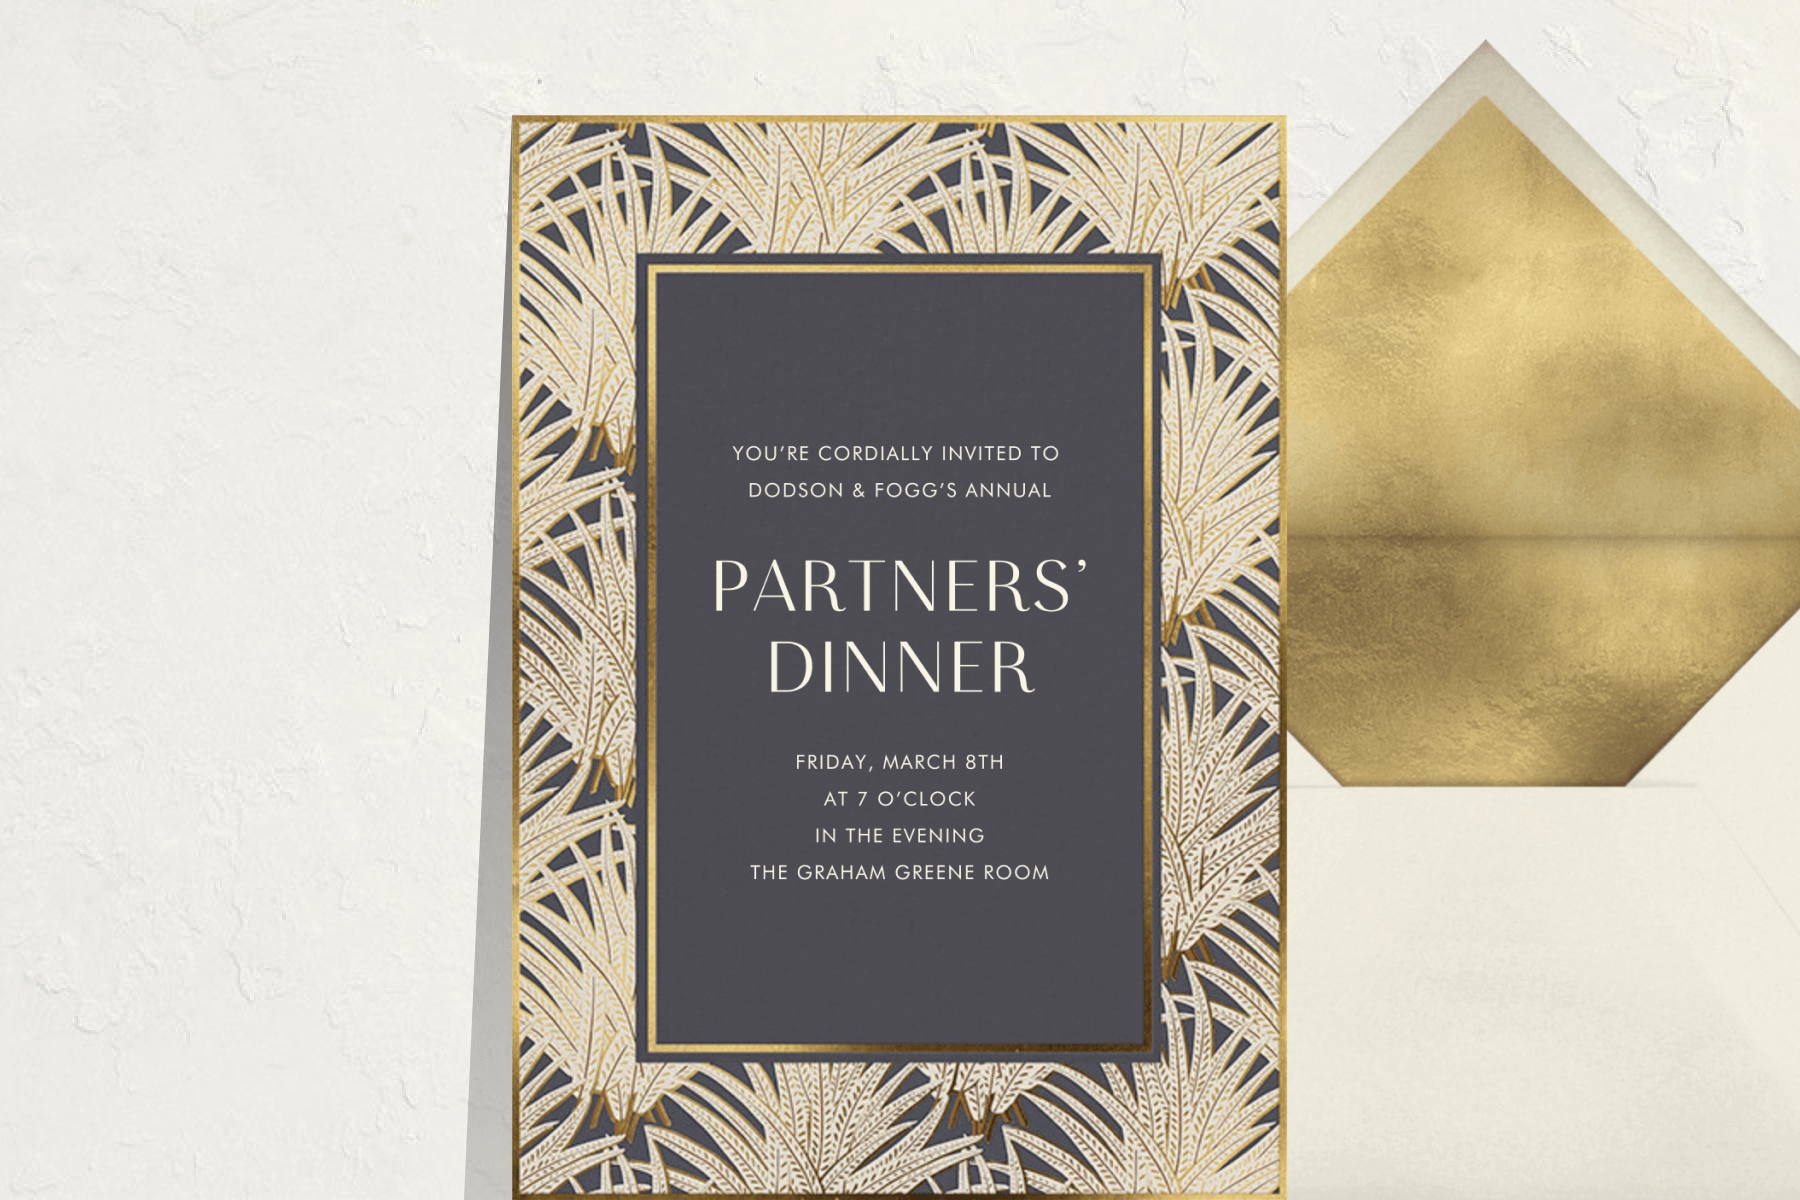 A professional invitation featuring a border of gold palm leaves.